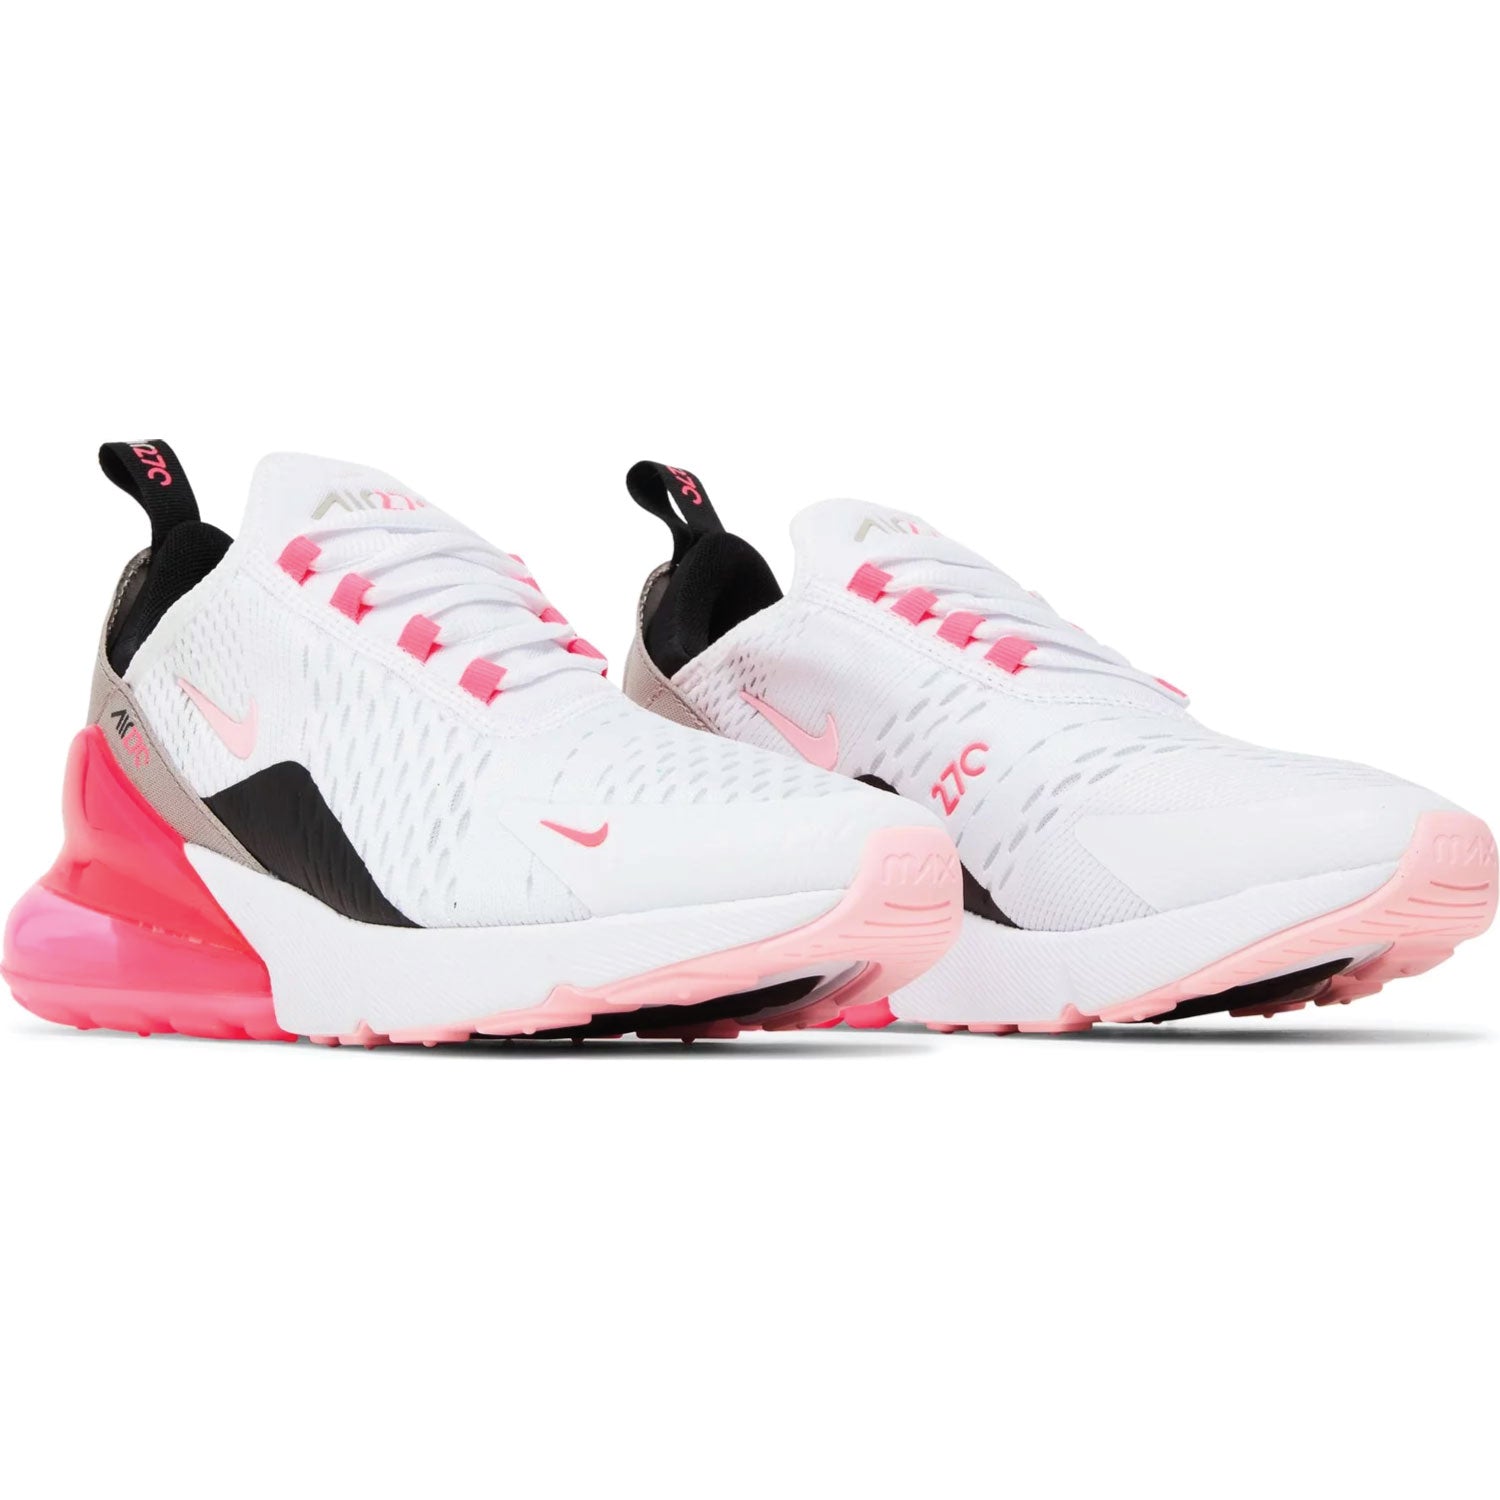 Wmns Air Max 270 Essential 'White Arctic Punch' Trainers Nike   